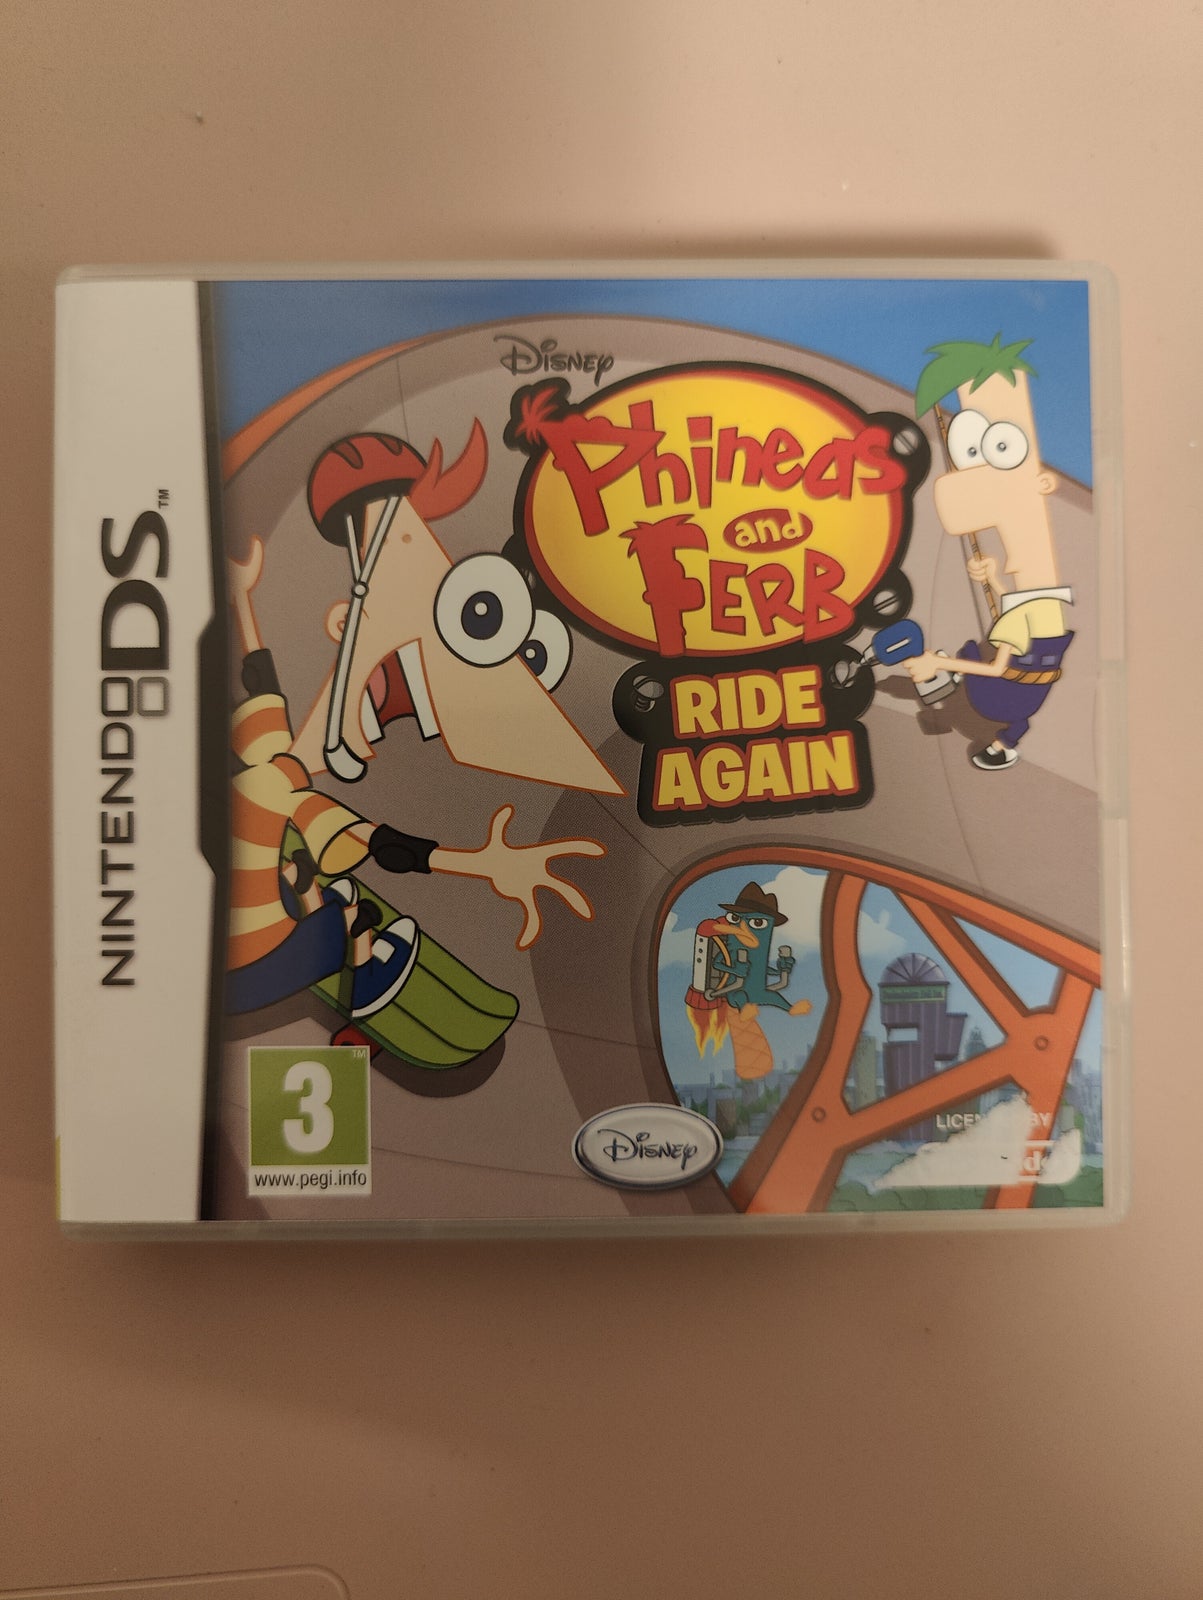 Phineds and ferb, Nintendo DS, adventure